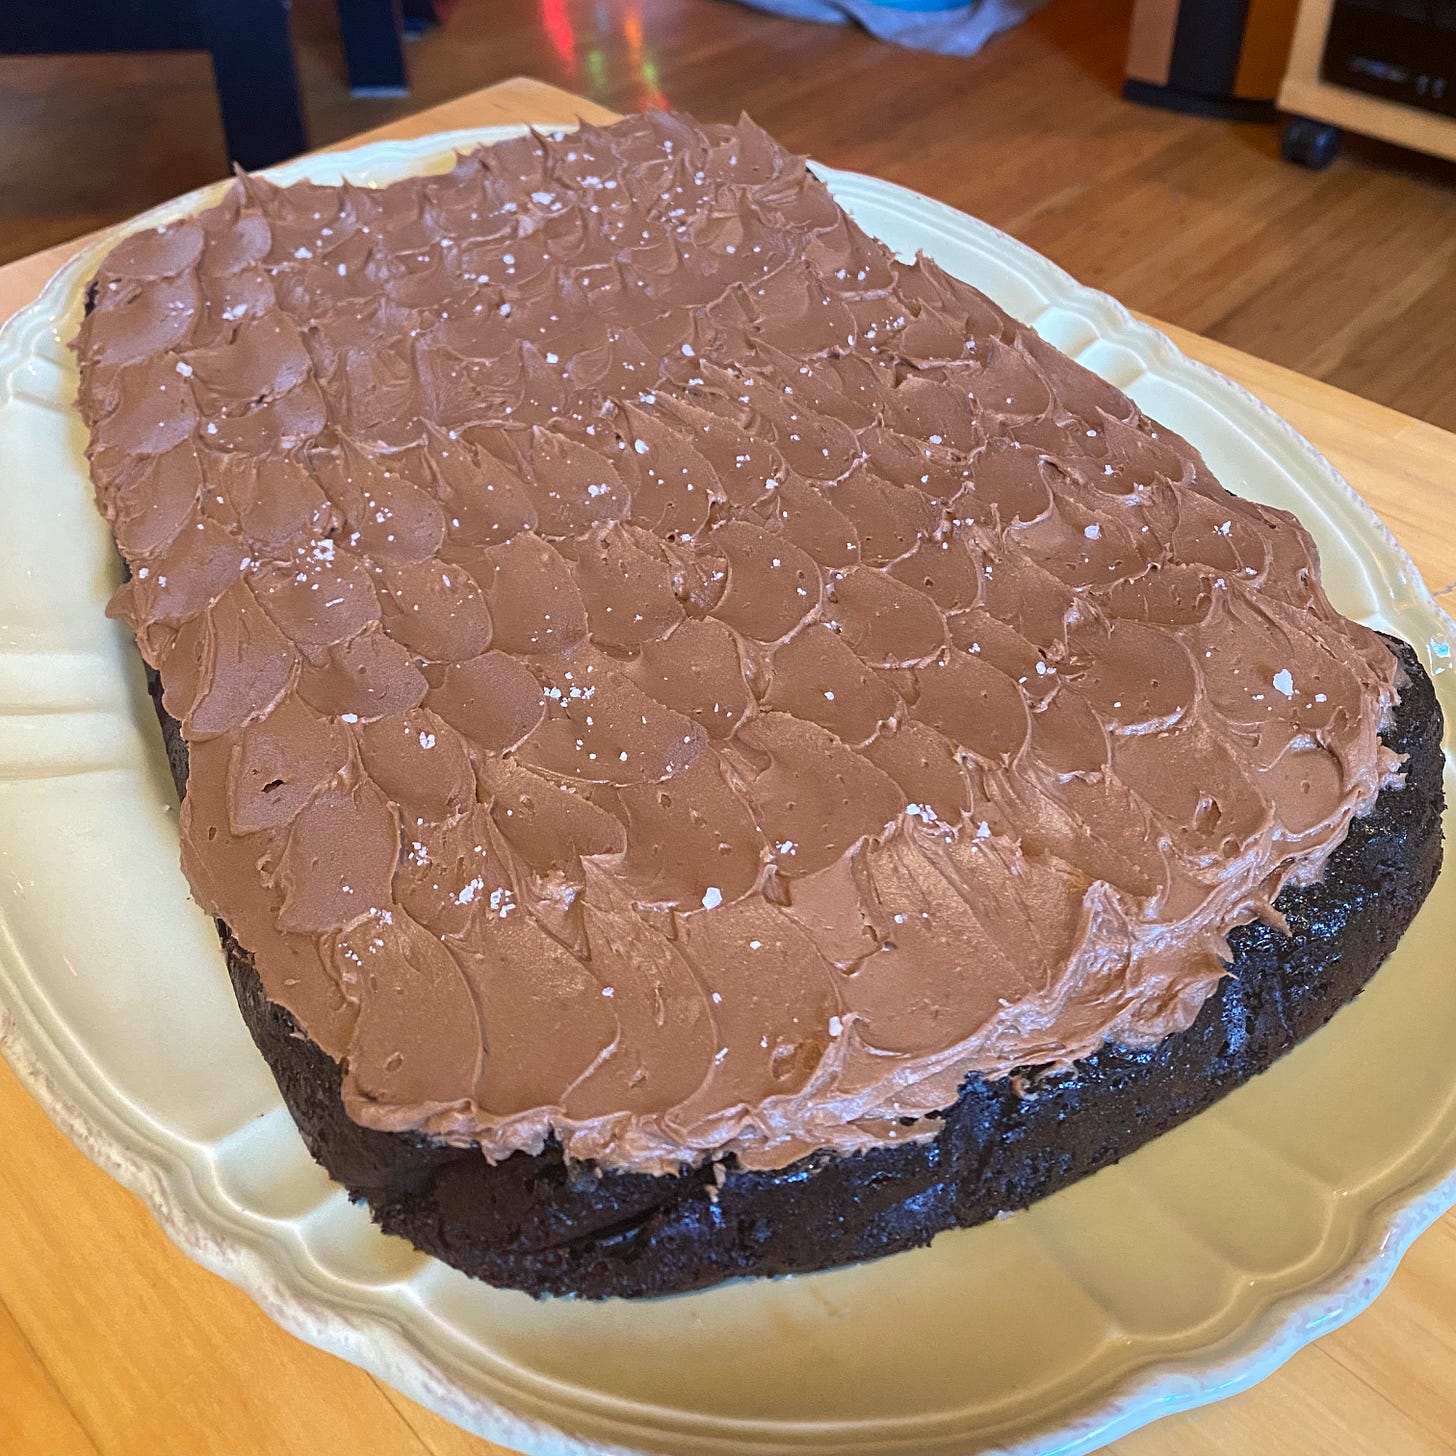 A large chocolate sheet cake with milk chocolate icing in waves, sprinkled with coarse salt and set on a green serving plate on the coffee table.